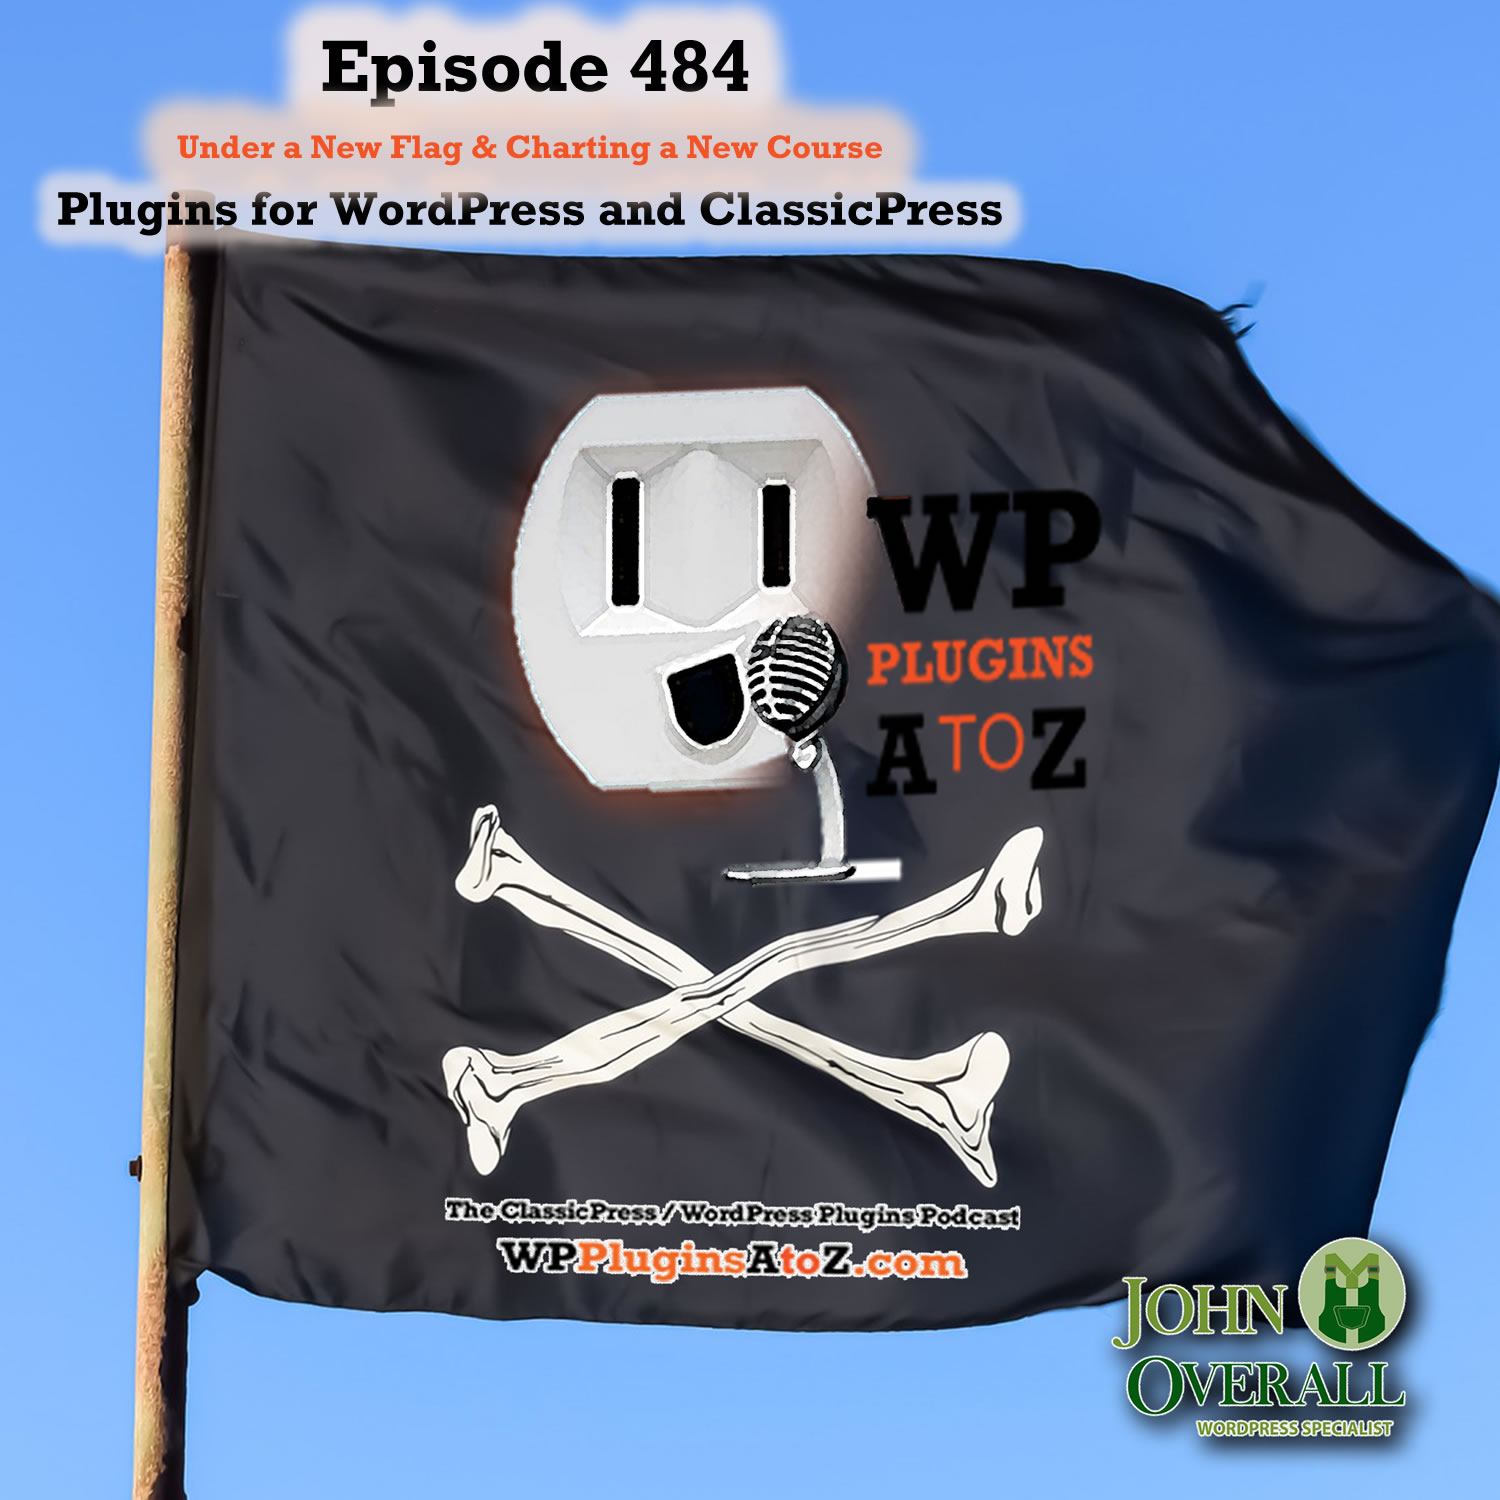 It's Episode 484 with plugins for Virtual Life, Variations, Colours, Dark Life, Notifications, Pro Admin pages, and ClassicPress Options. It's all coming up on WordPress Plugins A-Z! WP VR – 360 Panorama and Virtual Tour Creator For WordPress, Variation Swatches for WooCommerce, Cubecolour New Plugins, Dark Mode for WP Dashboard, Notification Bar Builder for Elementor, WP Admin Pages PRO and ClassicPress options in Episode 484.